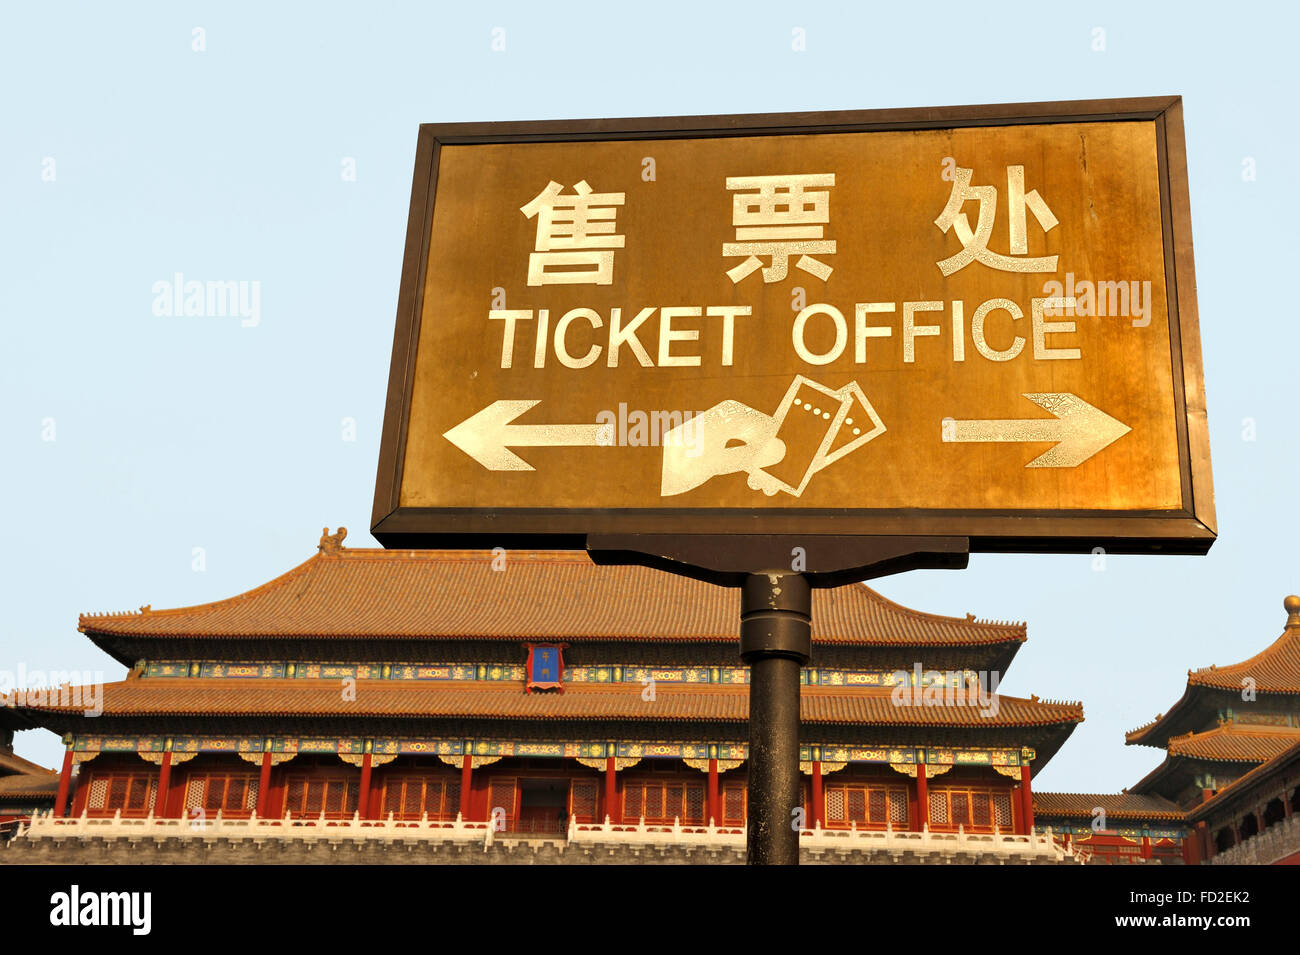 Entrance builing Forbidden City, Beijing, China. Also sign for ticket office, with text in English as well as in Chinese. Stock Photo